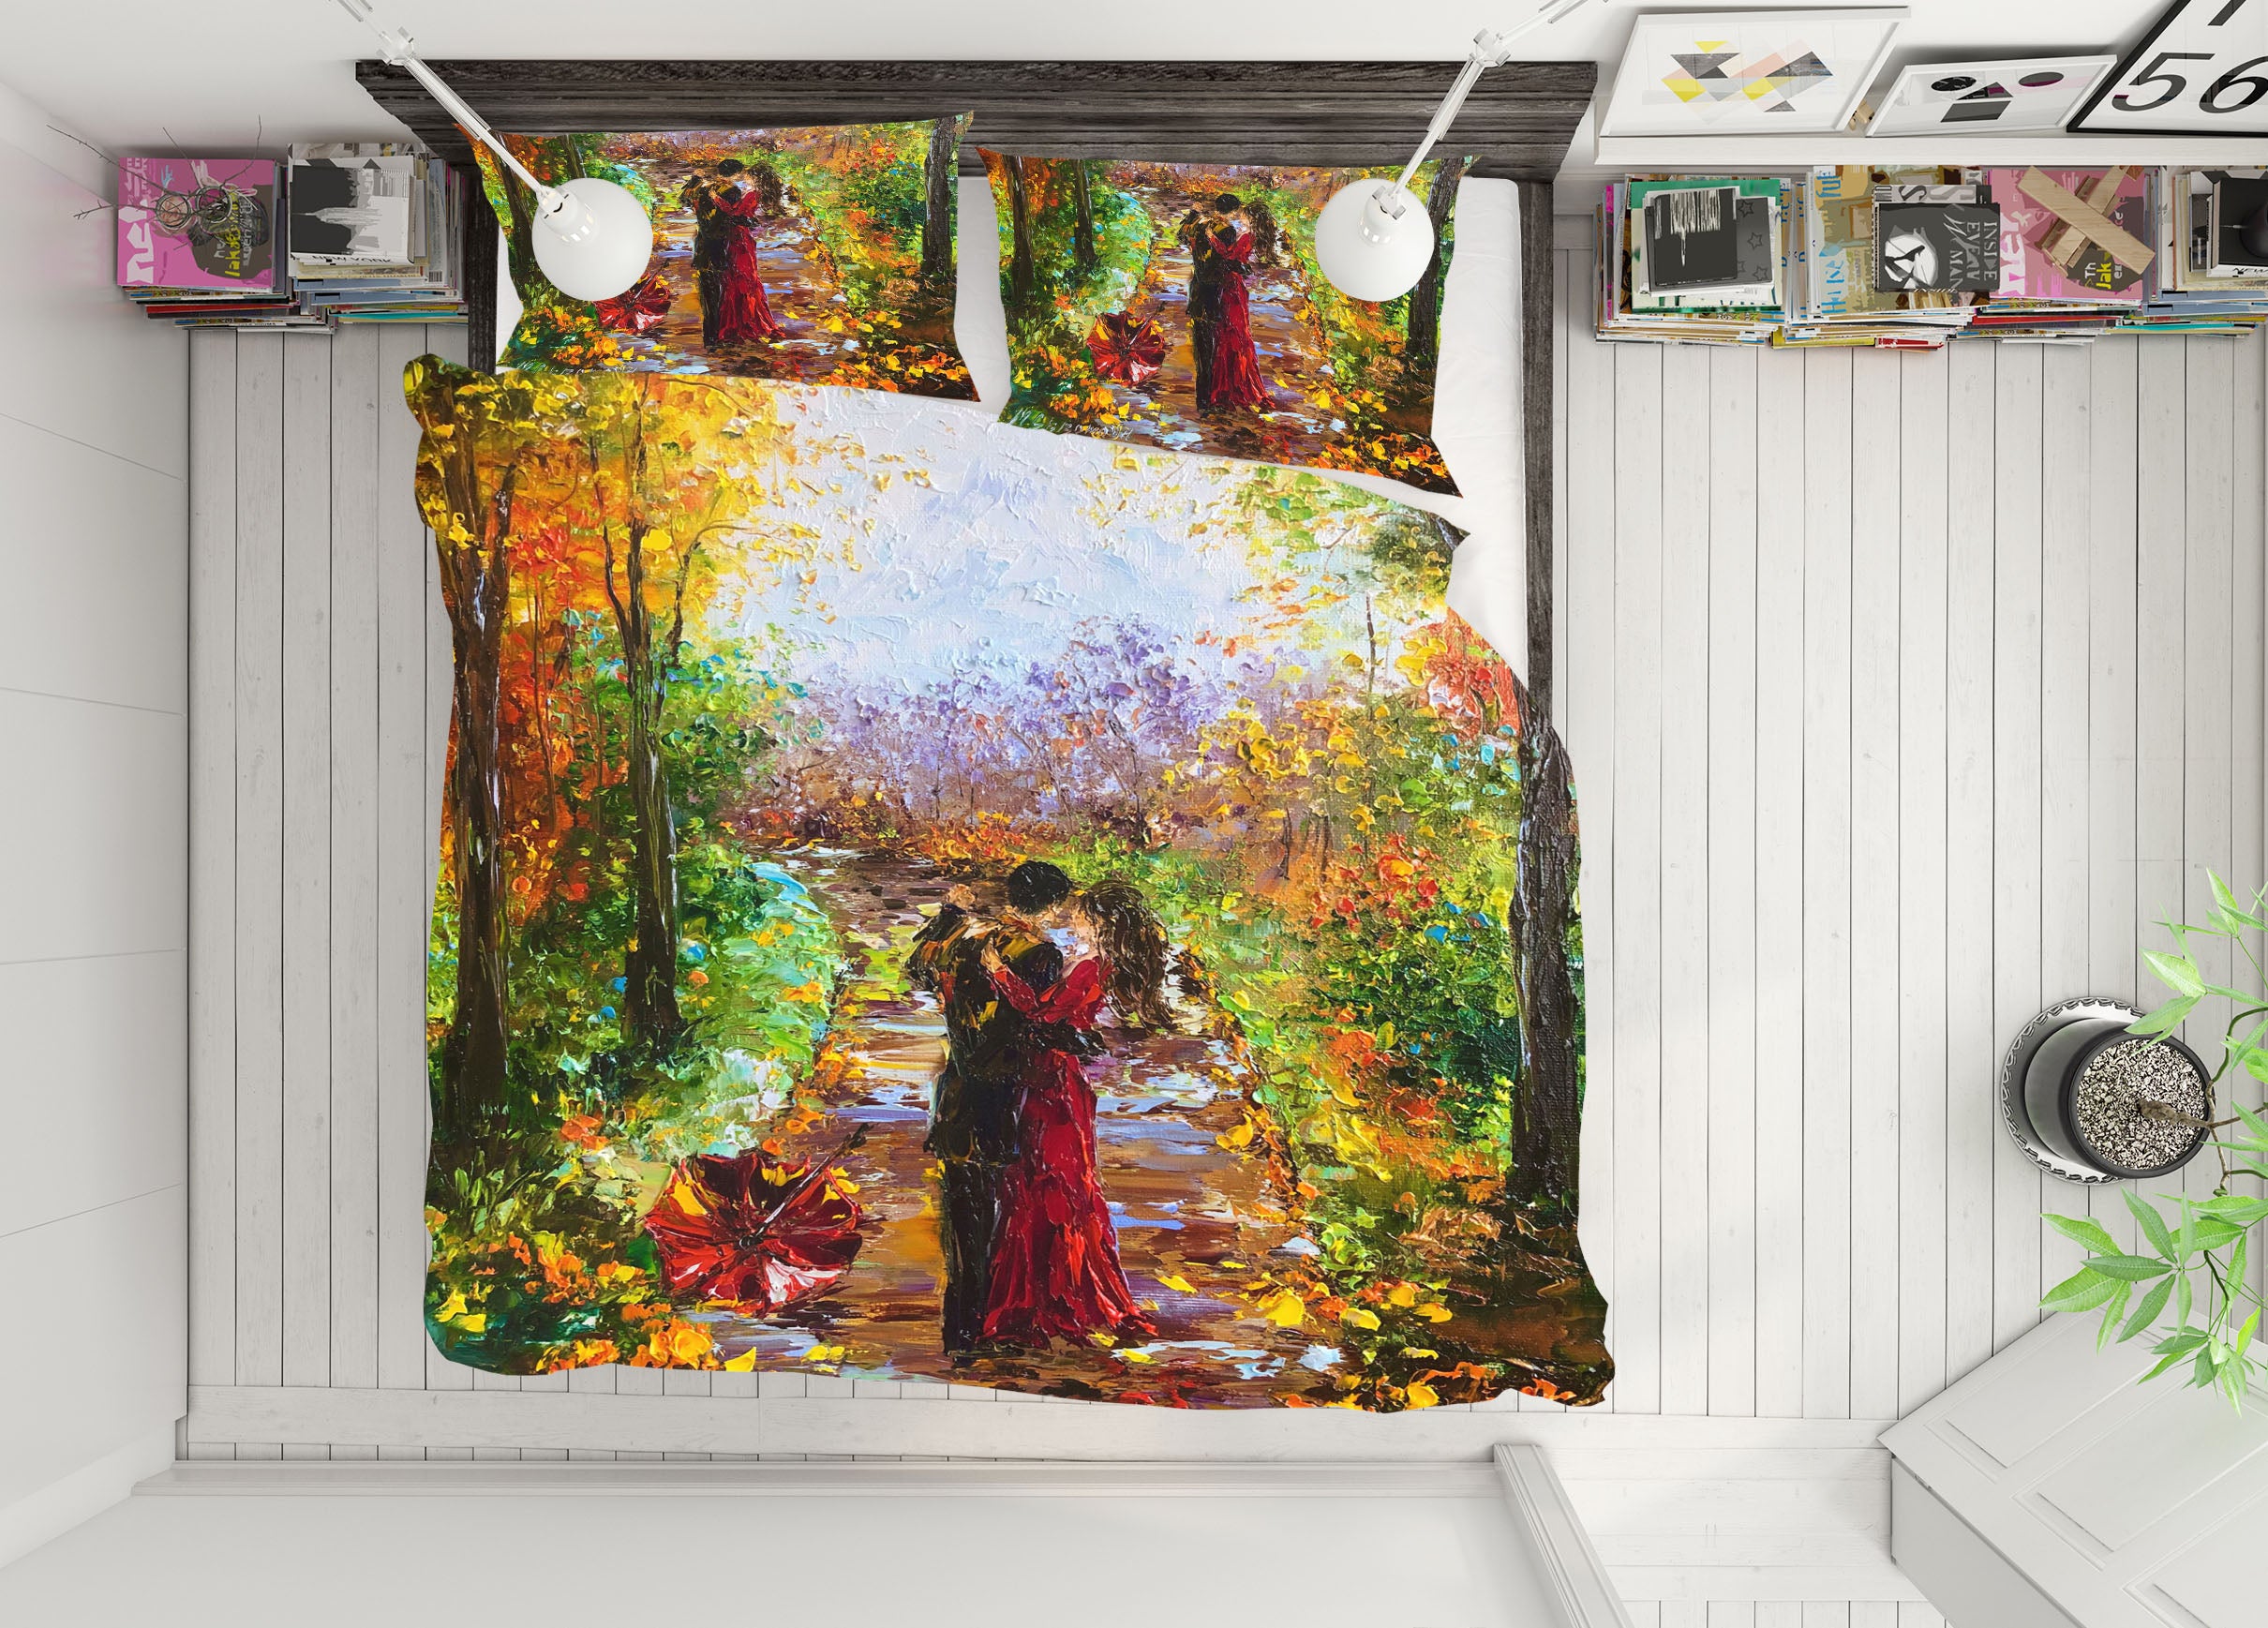 3D Oil Painting Couple 587 Skromova Marina Bedding Bed Pillowcases Quilt